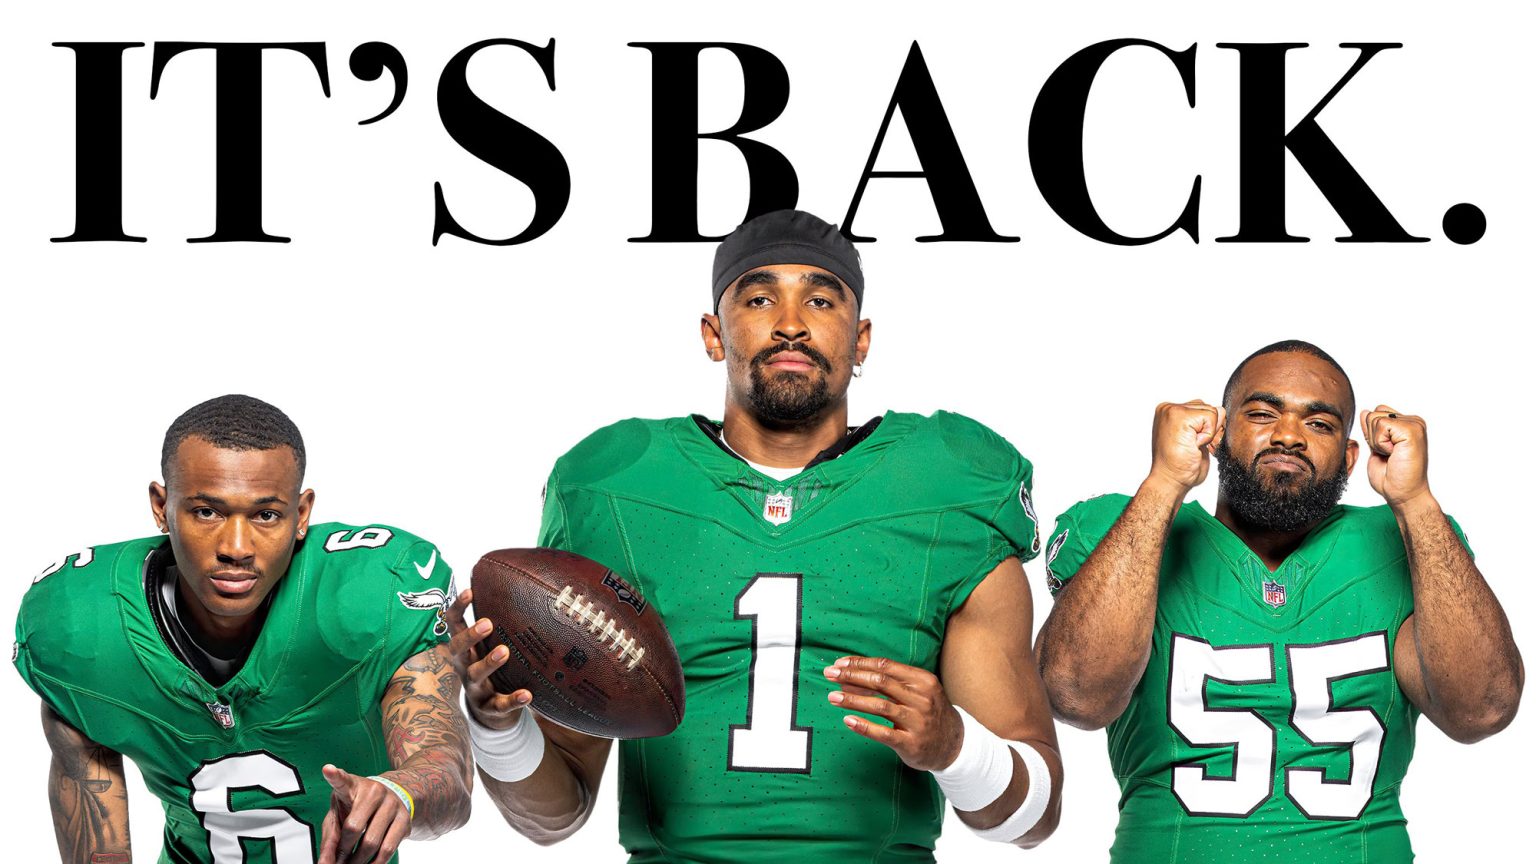 Philadelphia Eagles Unveil Kelly Green Throwback Uniforms After Images